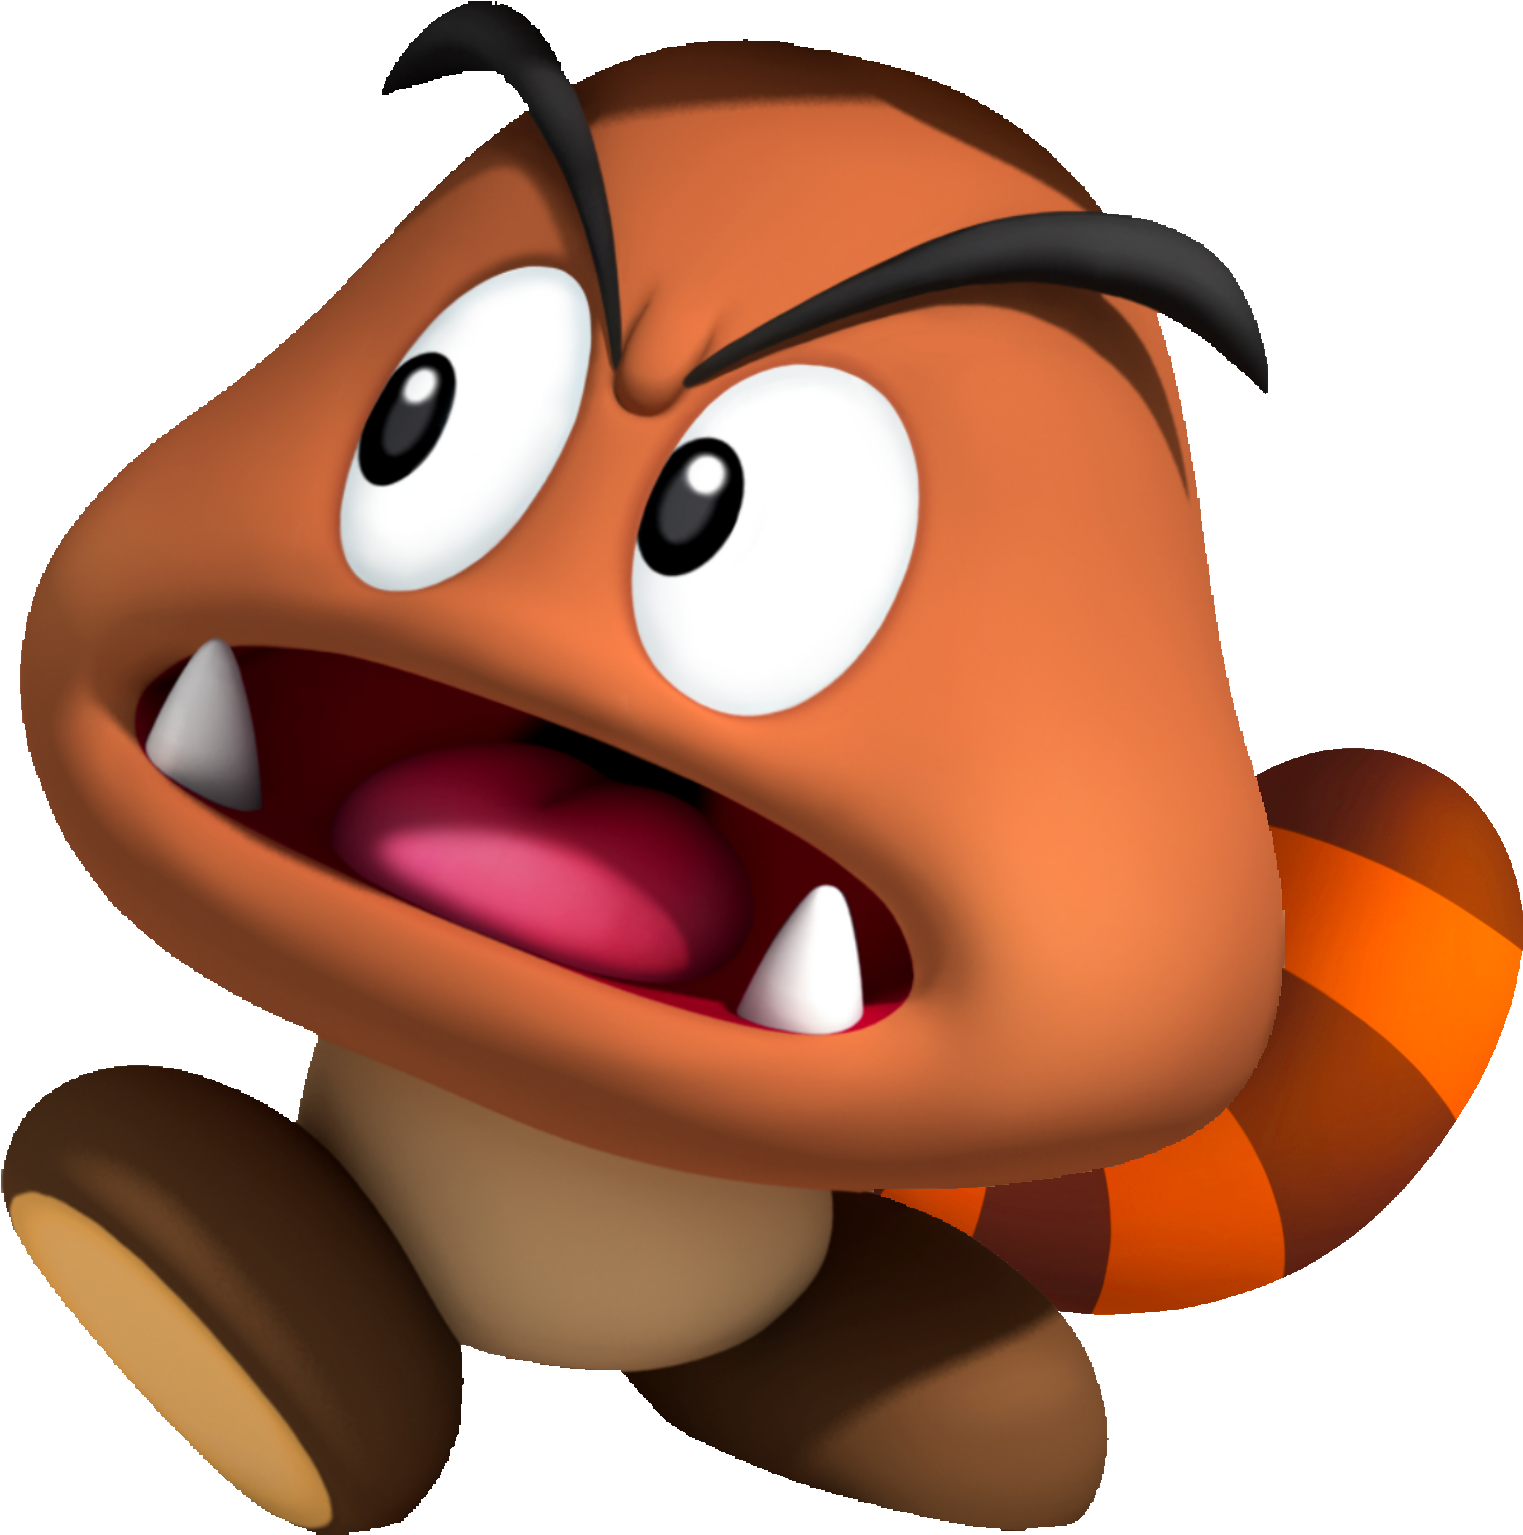 Image Pmttyd Goomba Png Fantendo The Fanon Wiki Image Goombas Mario Clipart Large Size Png